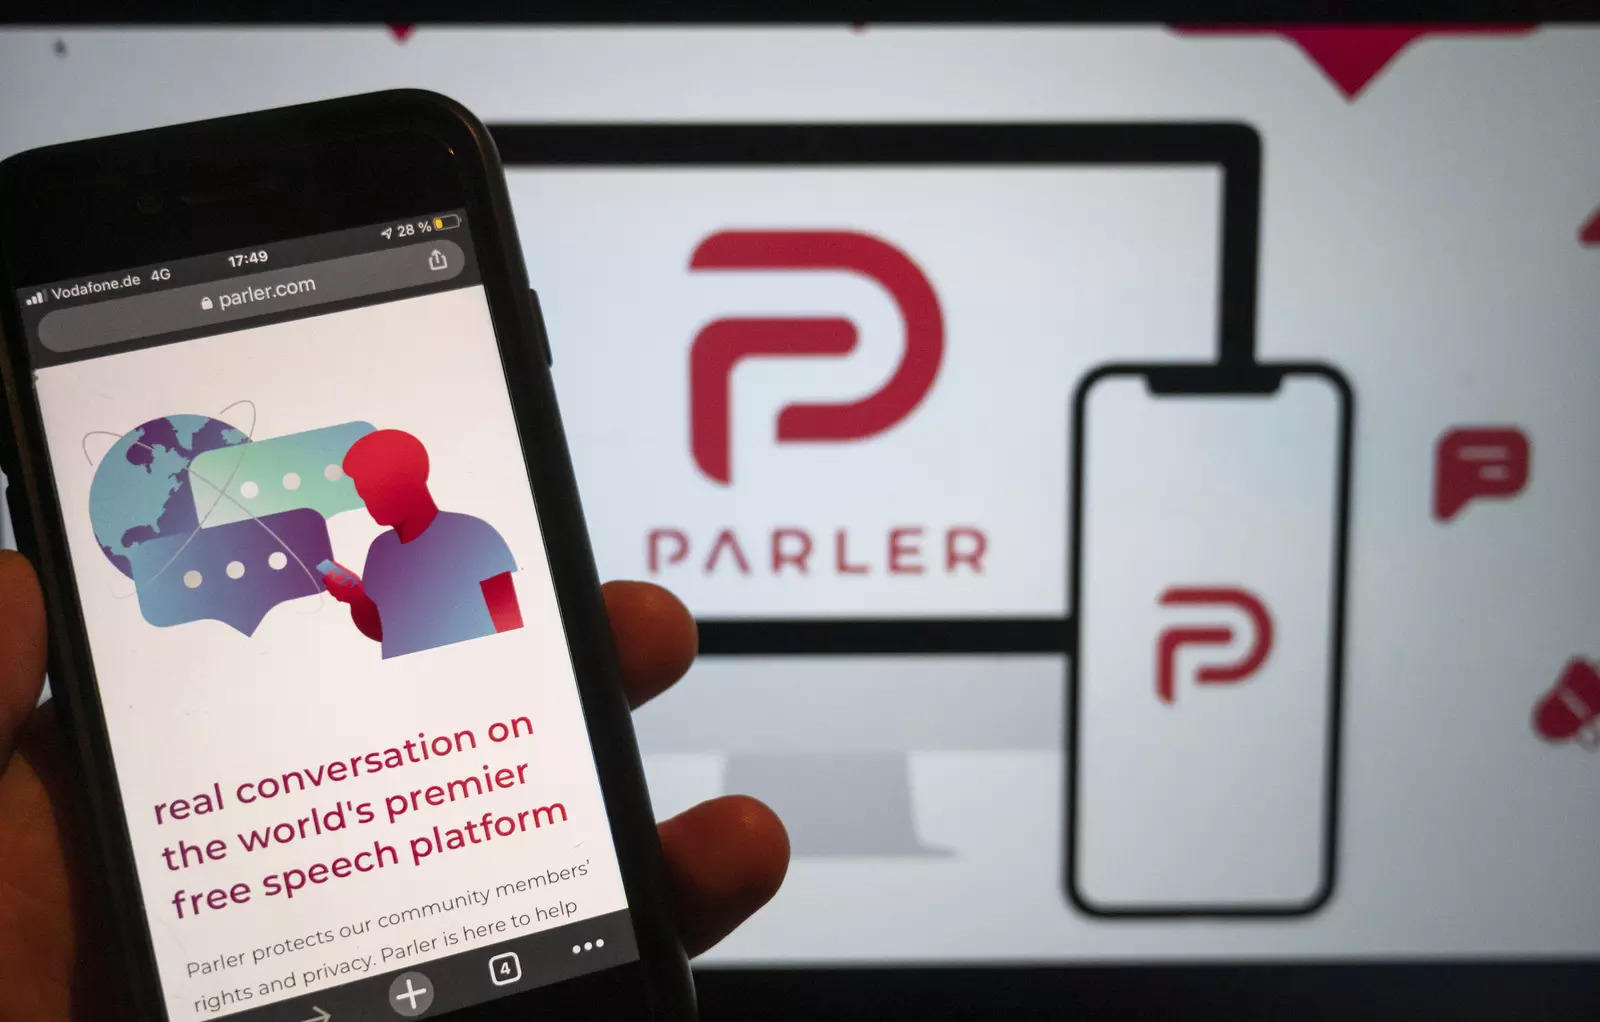 Parler is sued by co-founder Matze over ouster following U.S. Capitol riot